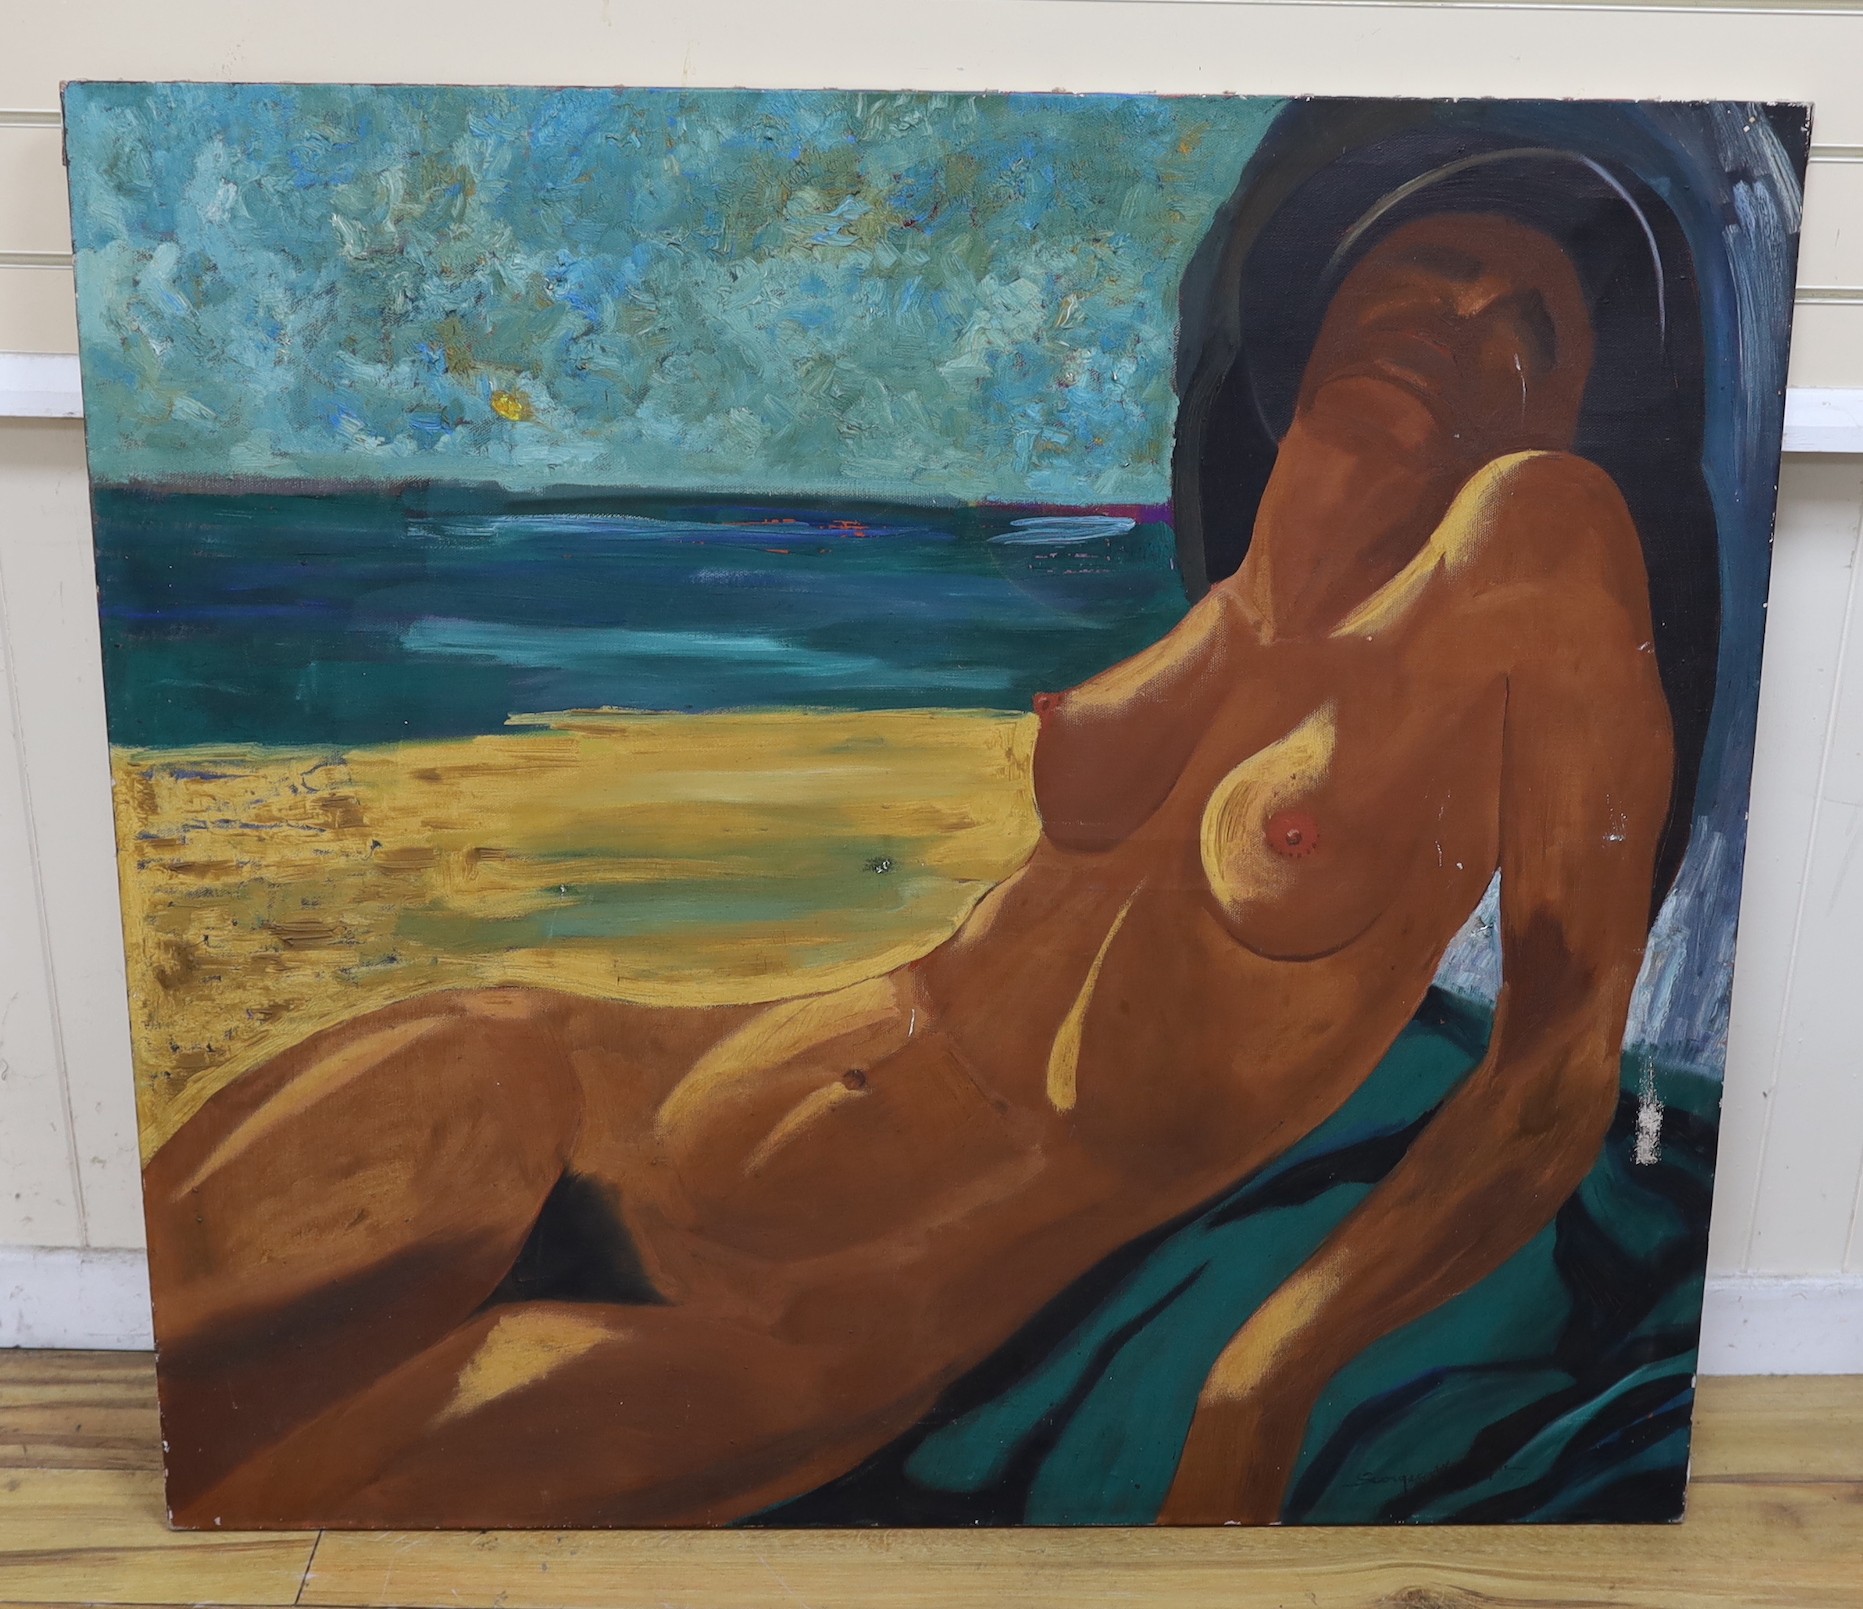 Georges ..., oil on canvas, Female nude on a beach, indistinctly signed, 110 x 120cm, unframed